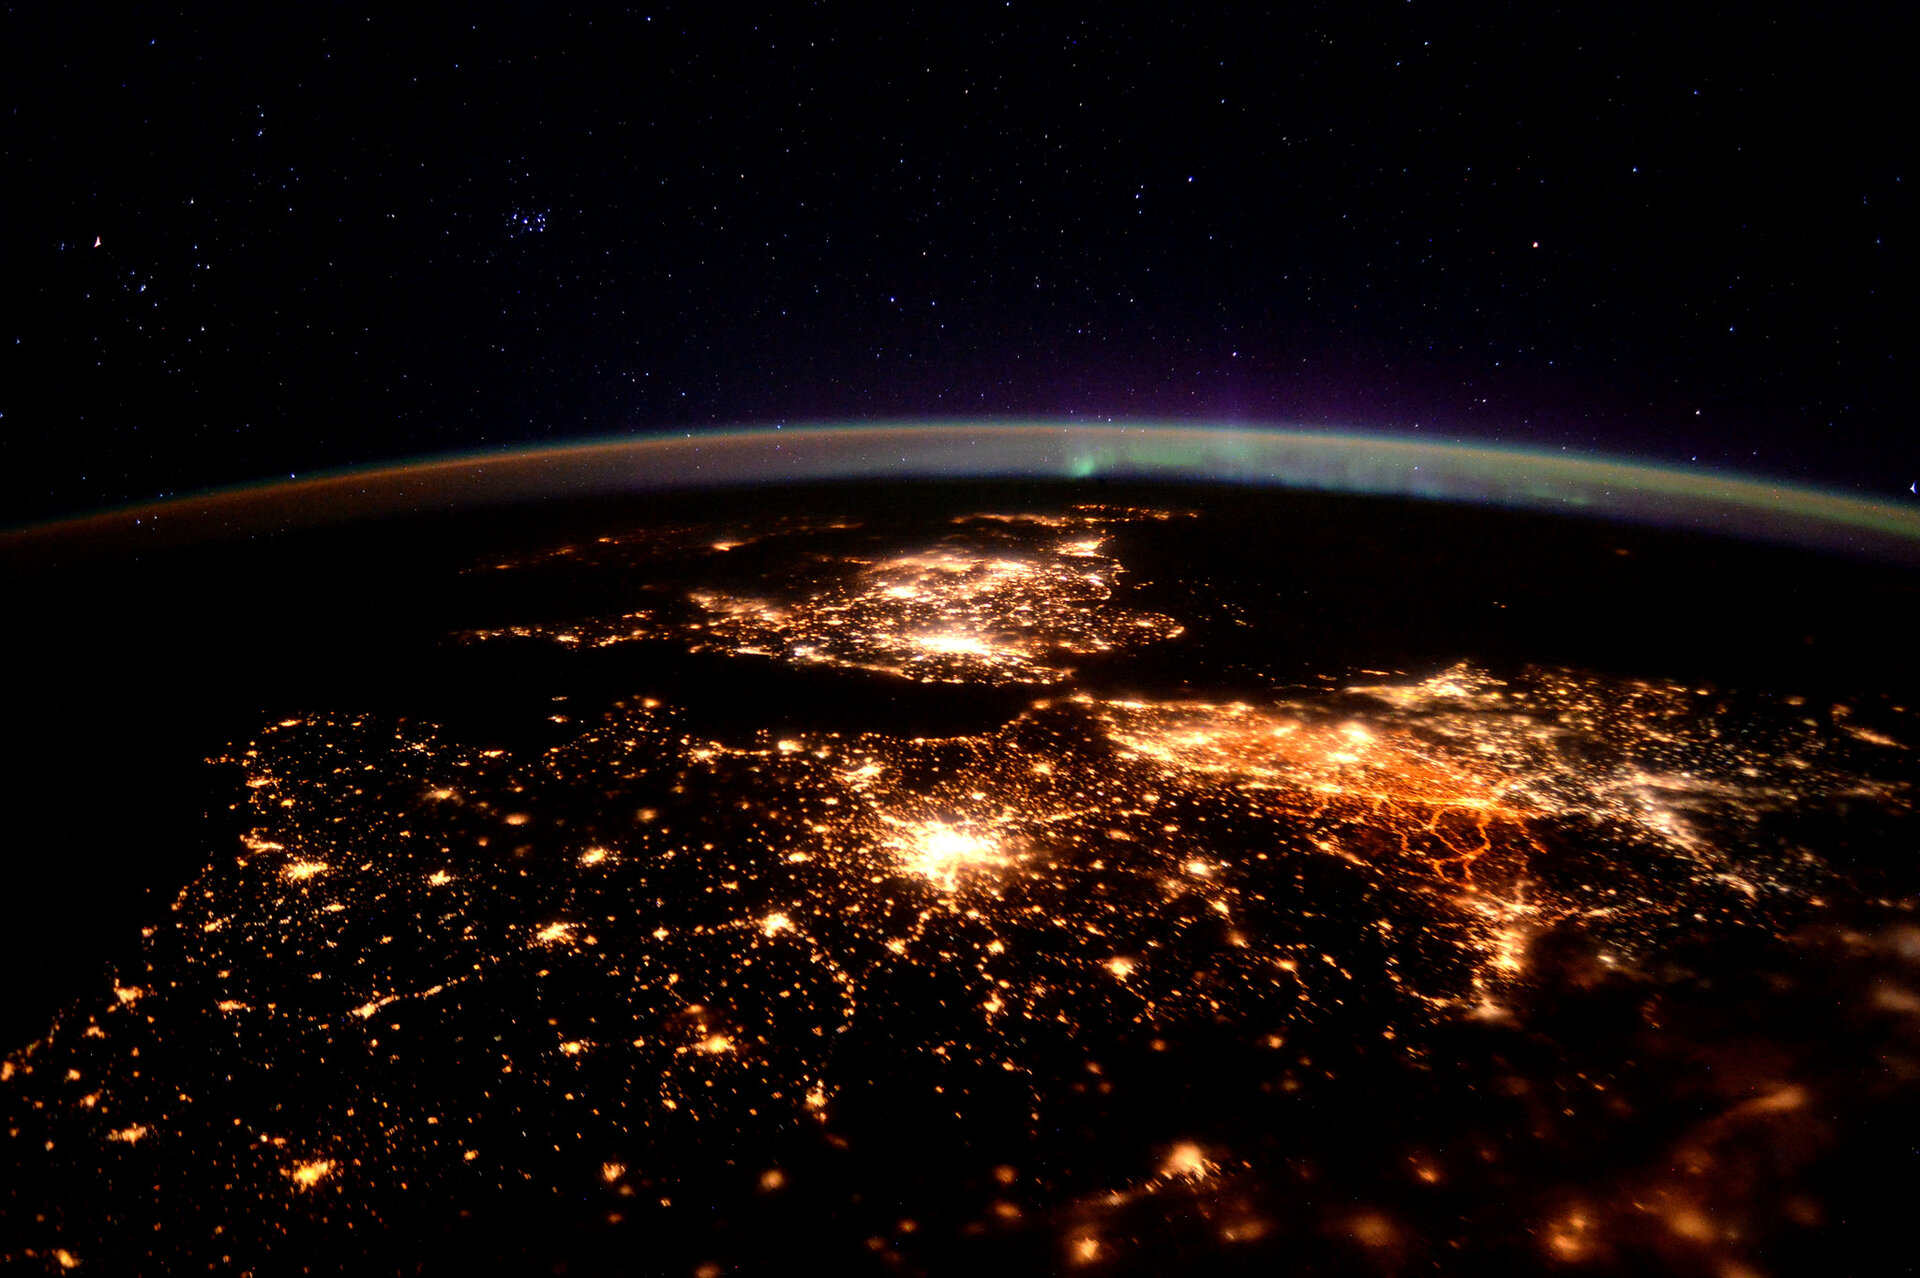 France seen at night from the International Space Station